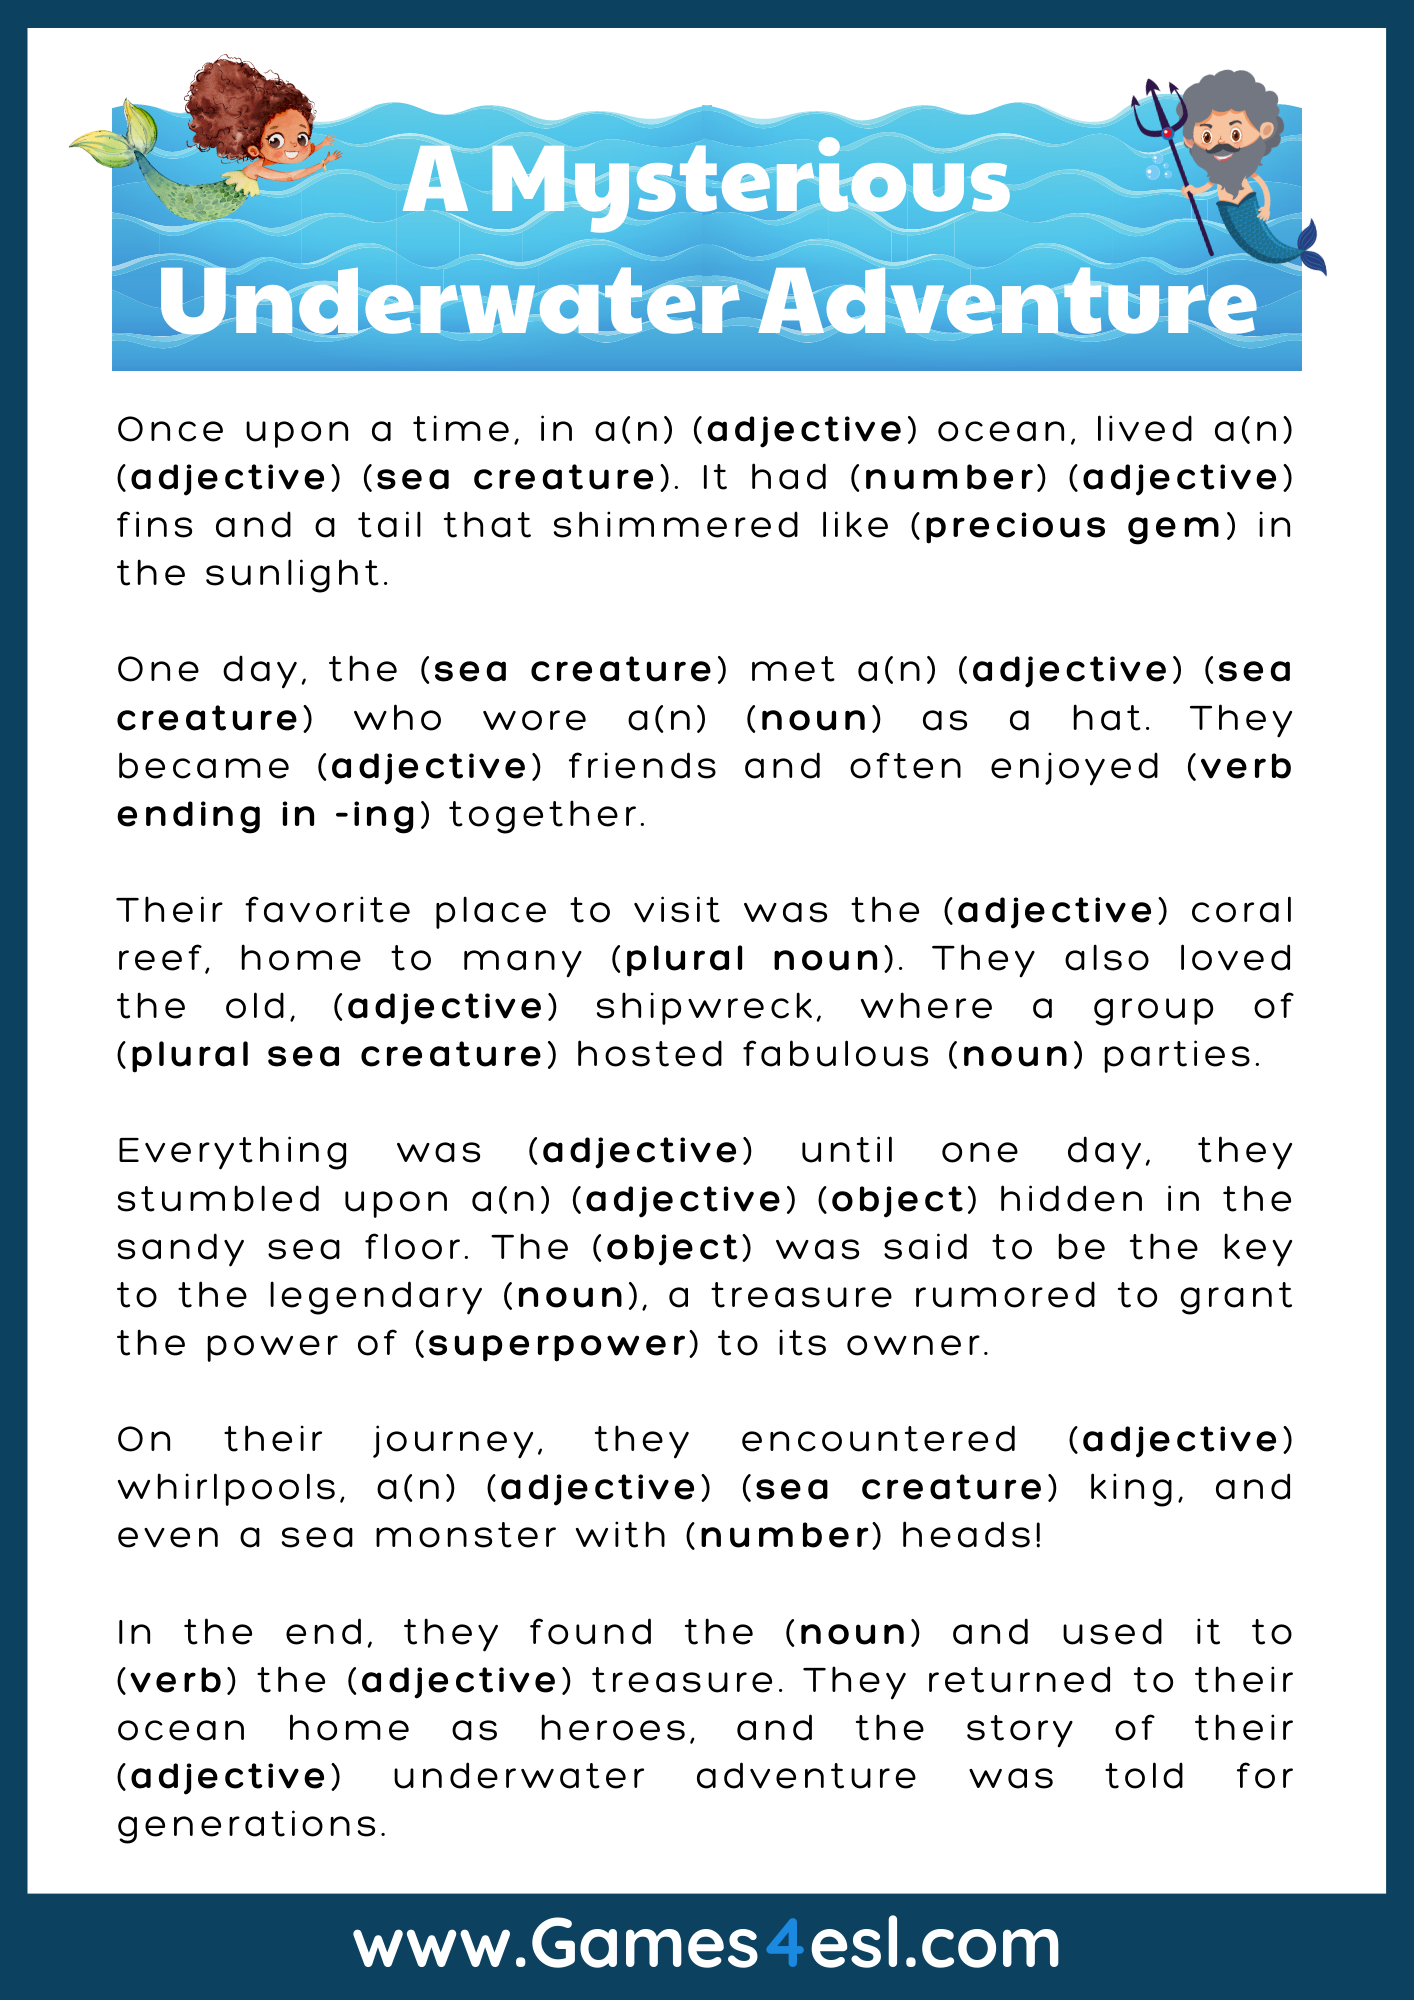 A Mad Lib About An Underwater Adventure